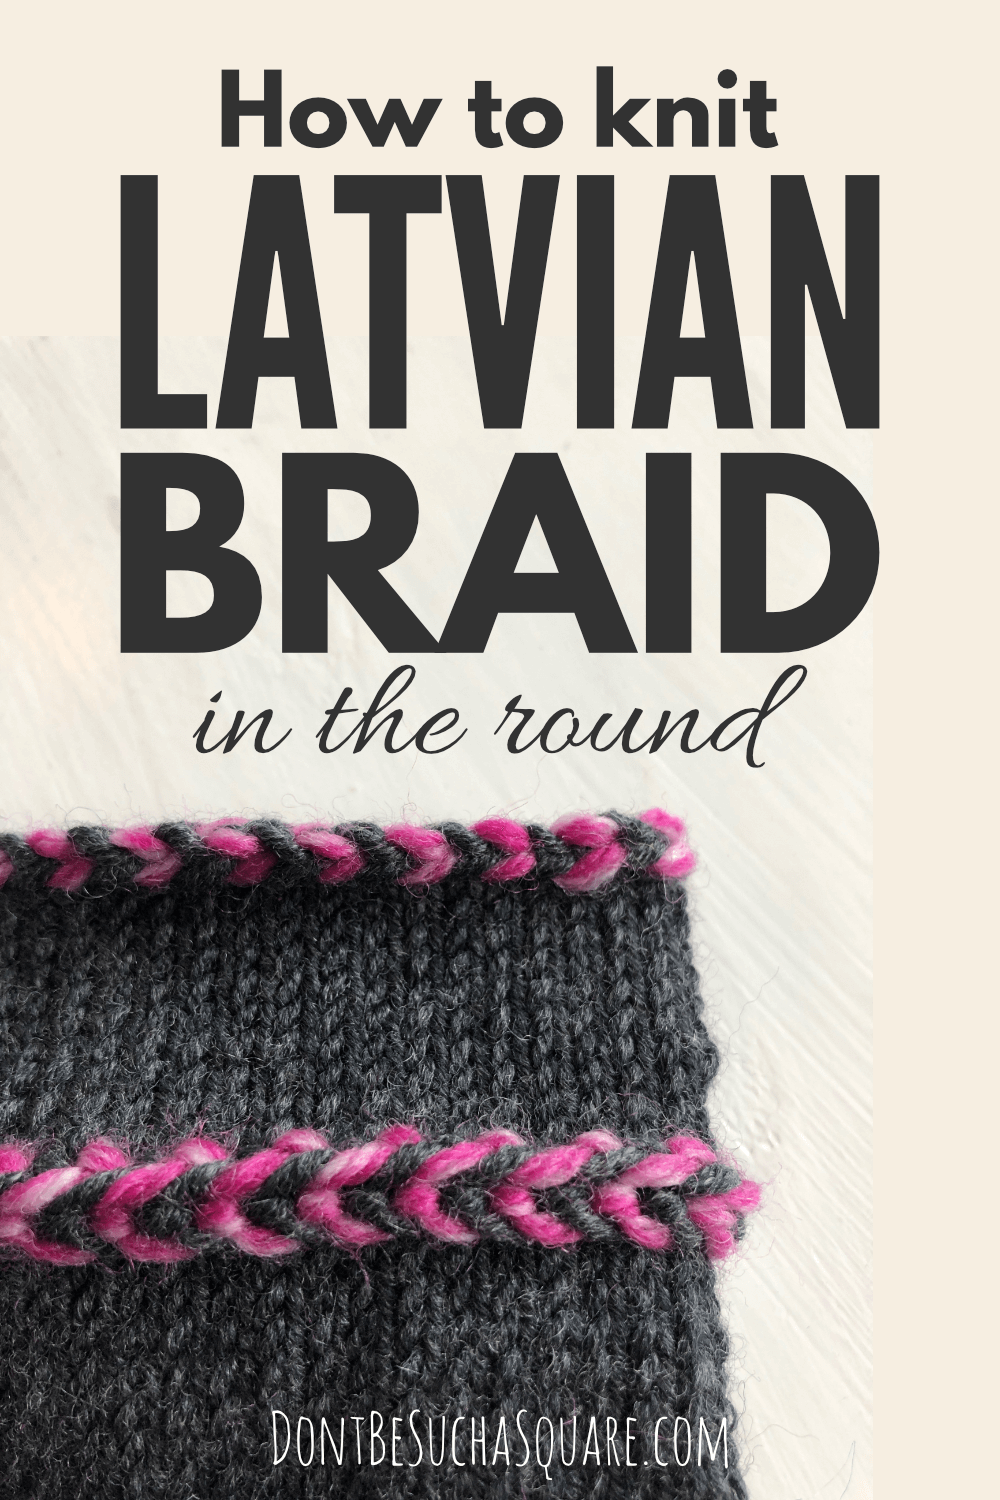 How to knit Latvian braid in the round